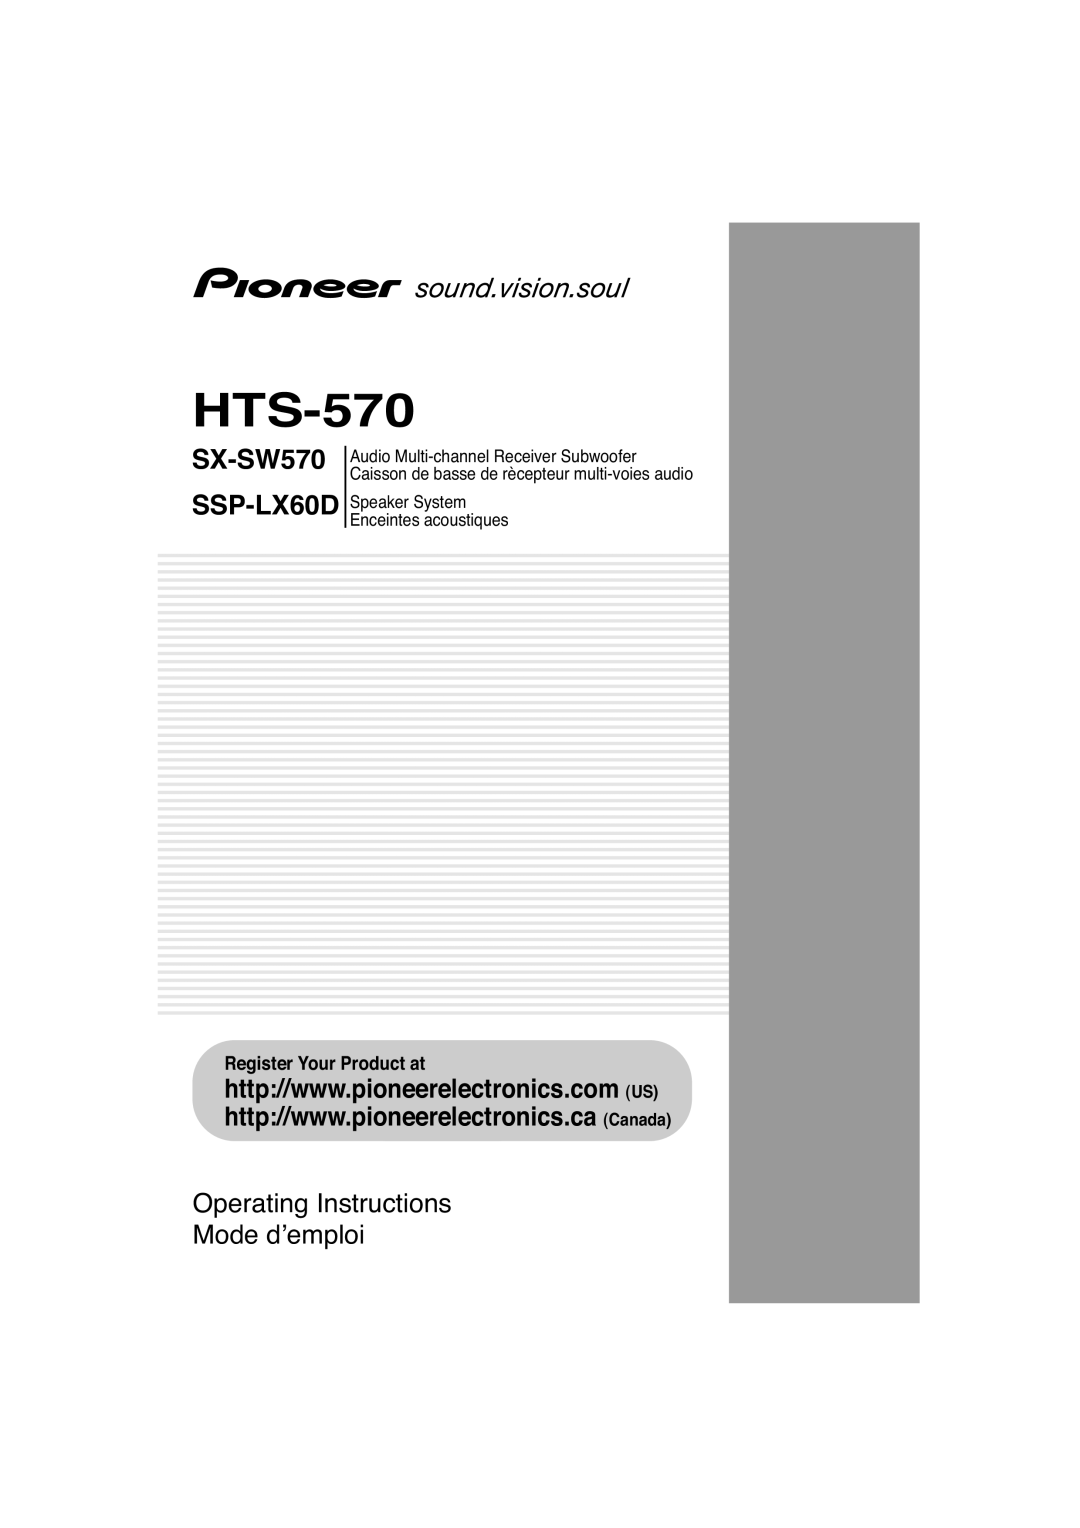 Pioneer operating instructions HTS-570, SX-SW570 SSP-LX60D, Operating Instructions Mode d’emploi 